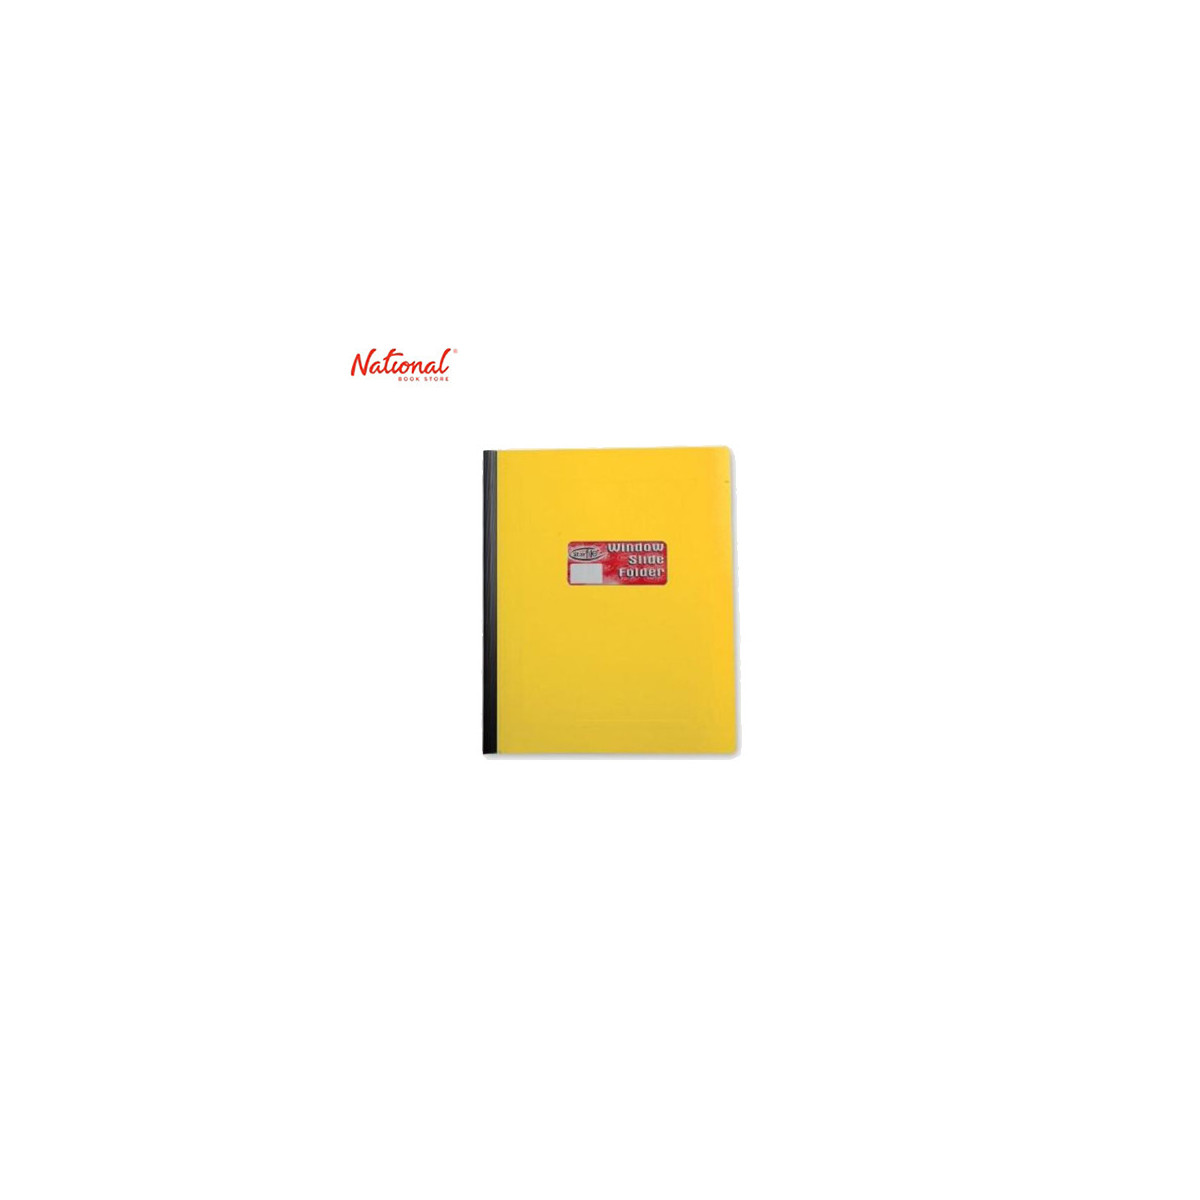 STARFILE Folder Report Cover with Slide Long Deep with Window Yellow